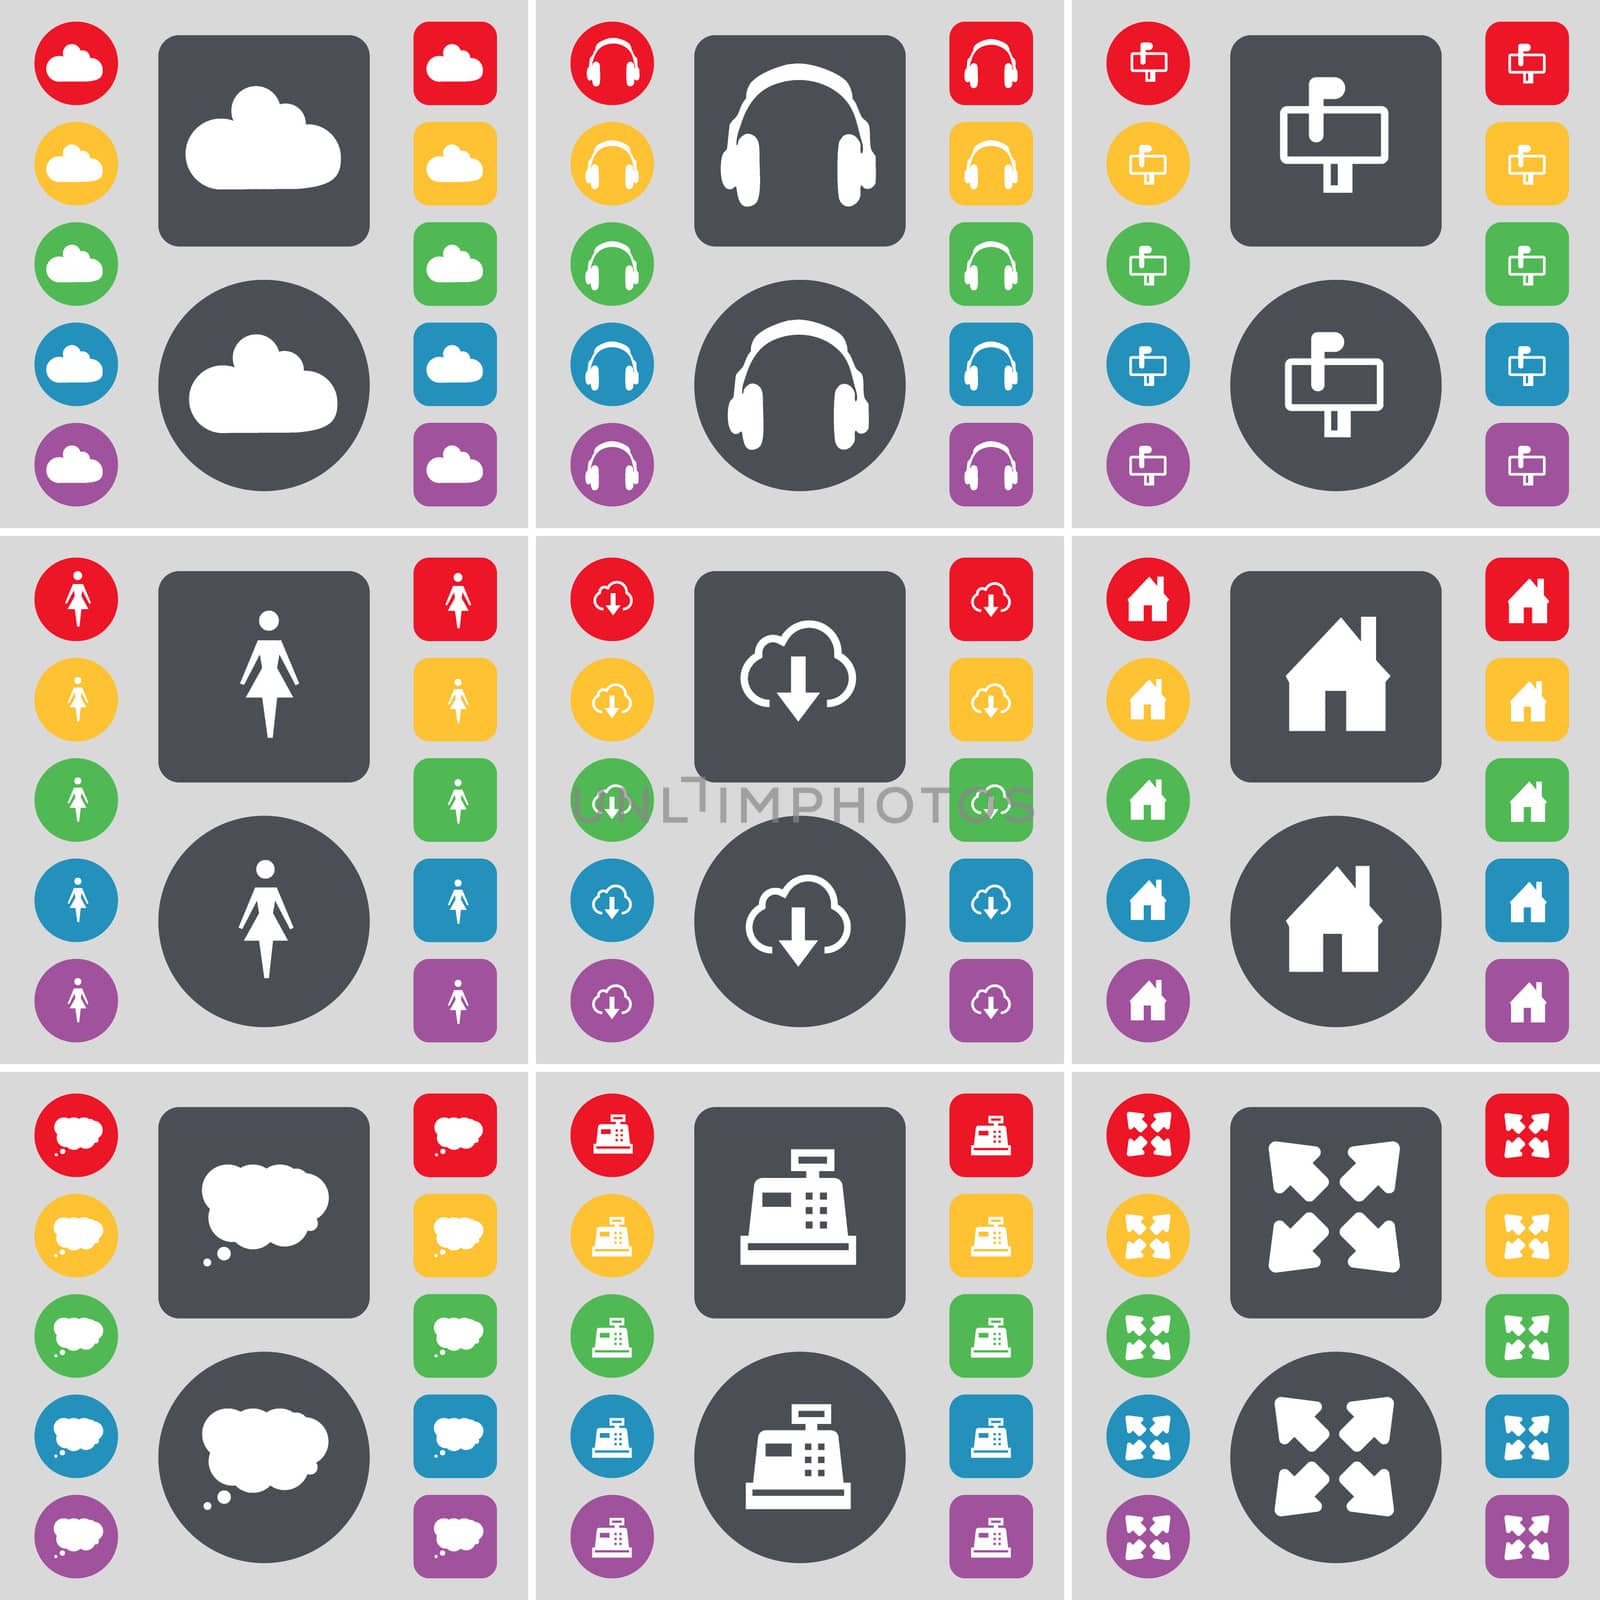 Cloud, Headphones, Mailbox, Silhouette, Cloud, House, Chat cloud, Cash register, Full screen icon symbol. A large set of flat, colored buttons for your design.  by serhii_lohvyniuk